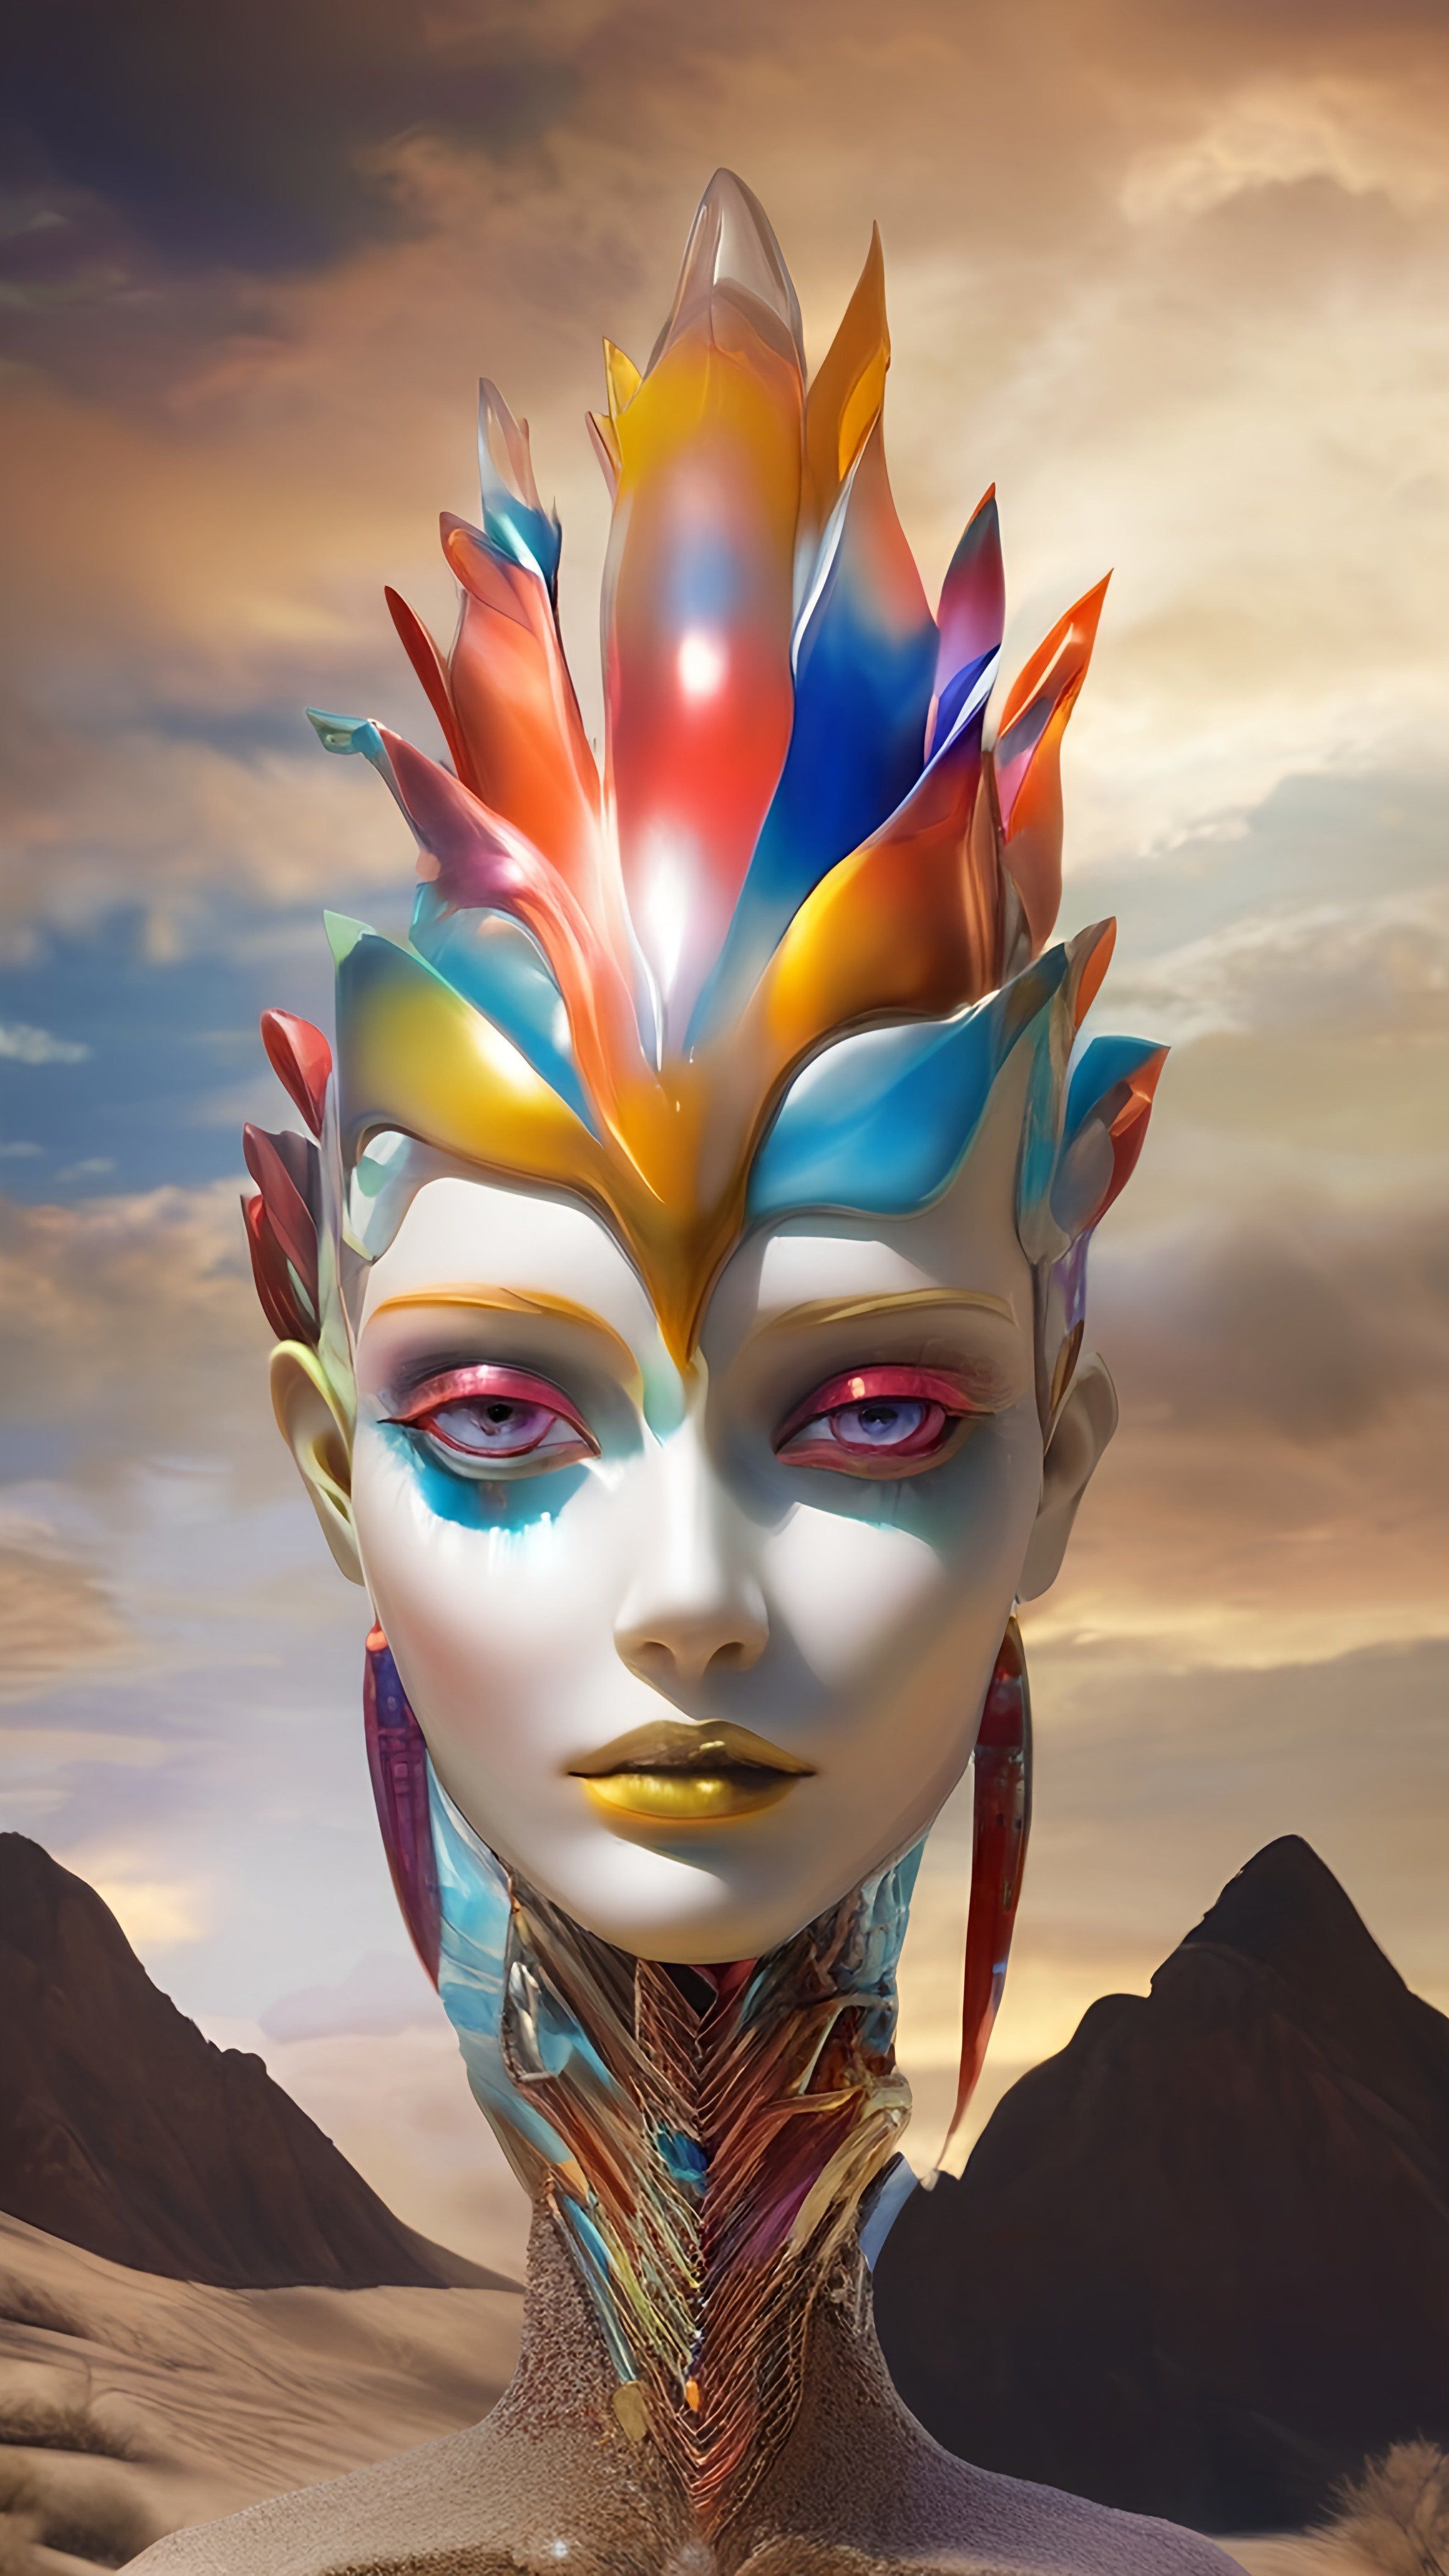 Prompt: a woman with a colorful headpiece and a sky background with clouds and mountains in the background